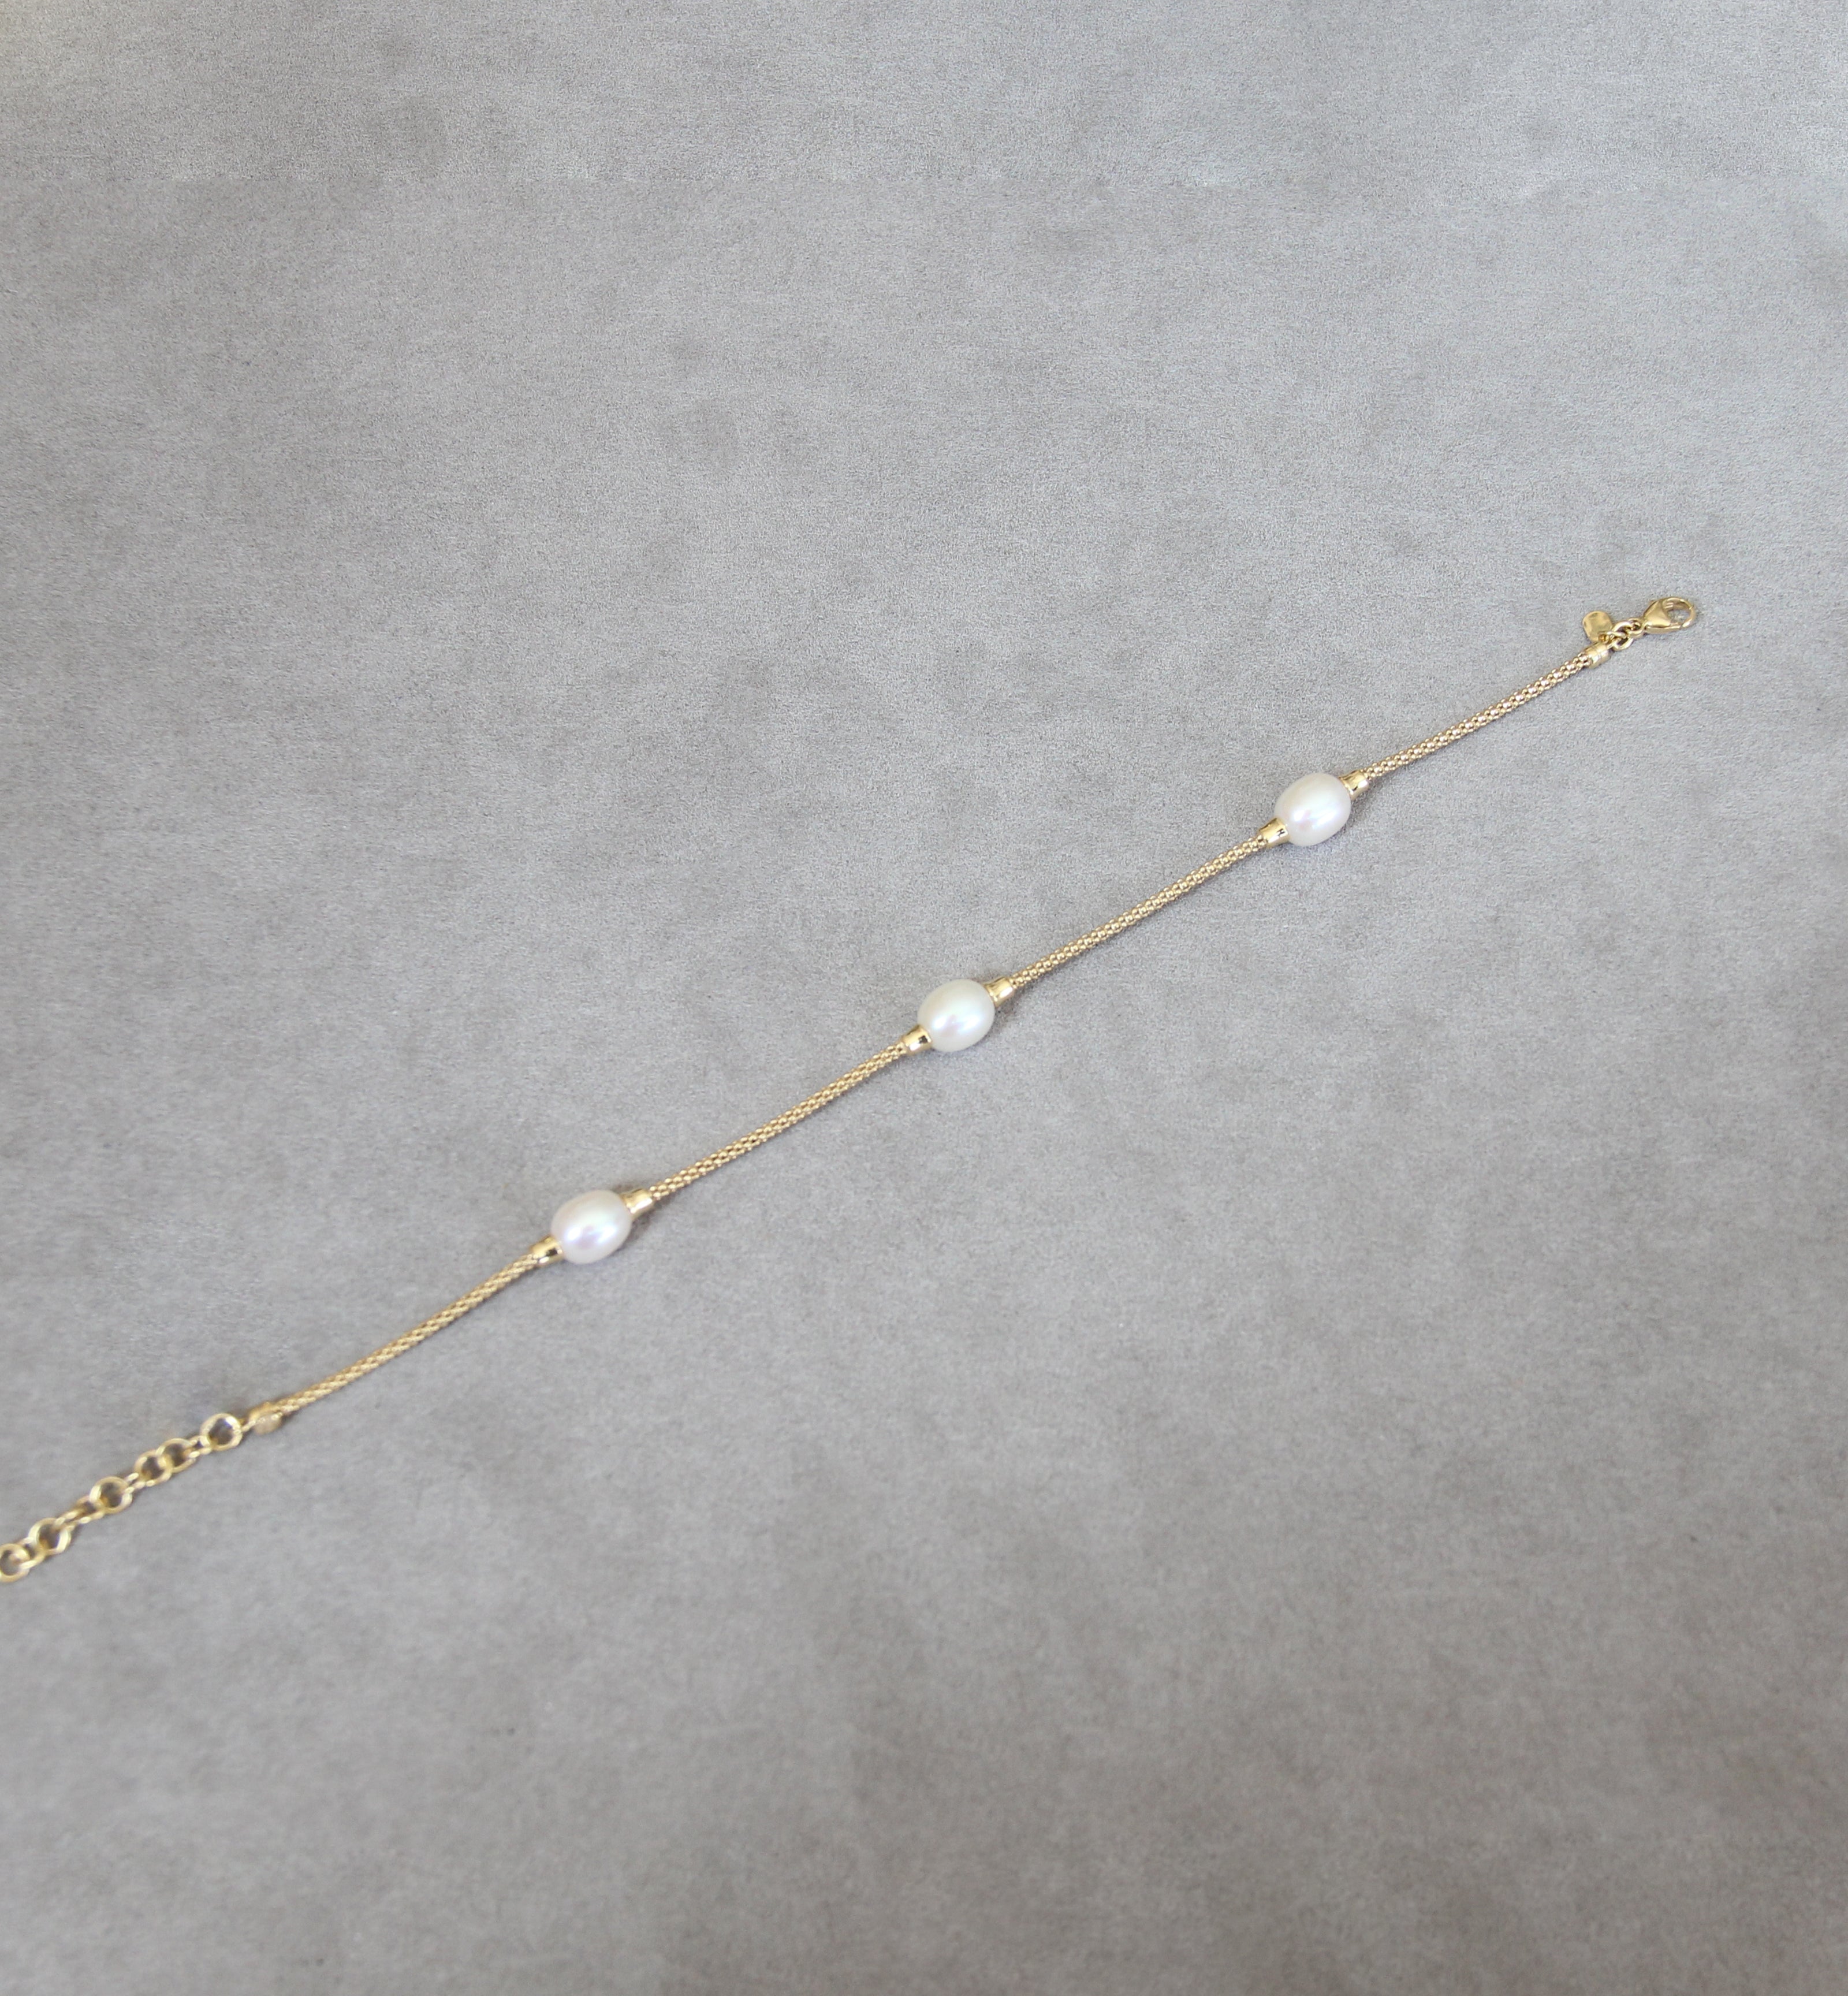 Silver 925 Bracelets with Cultured Pearls